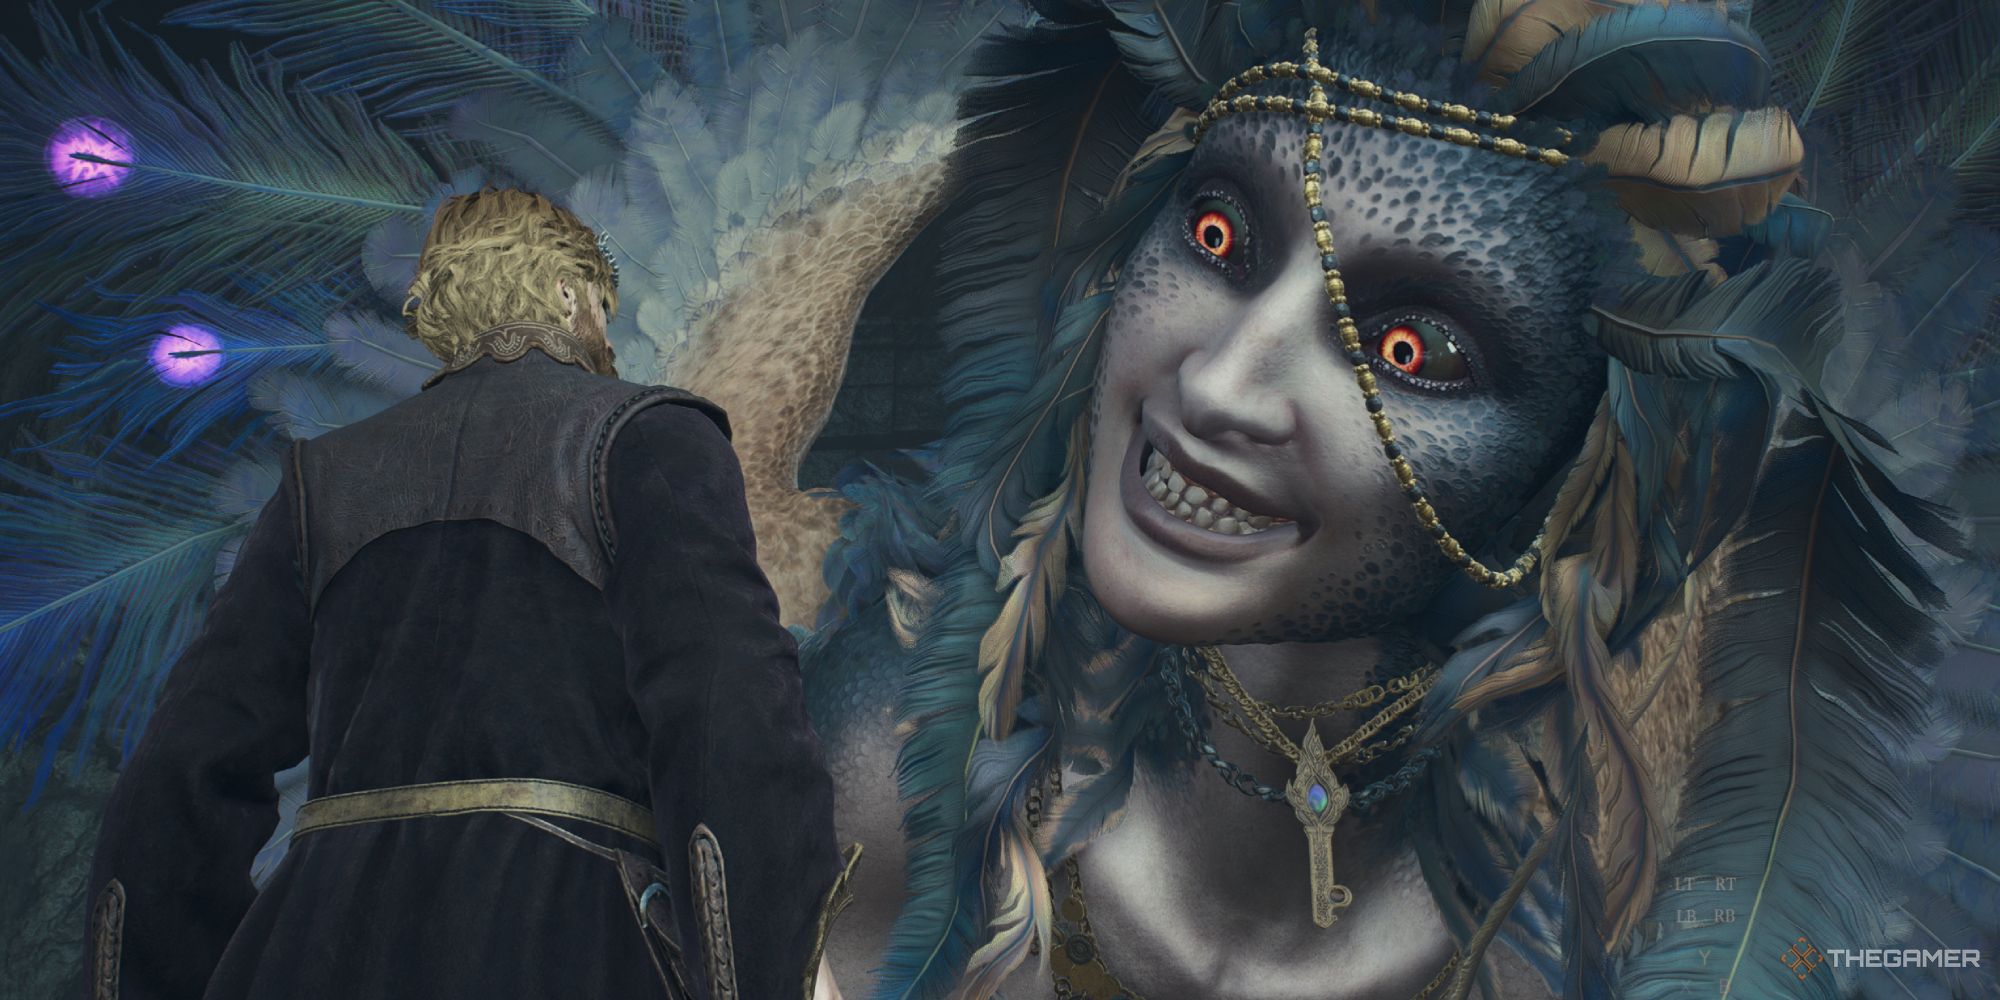 The Sphinx is looking at the Arisen with a scary face - Dragon's Dogma 2